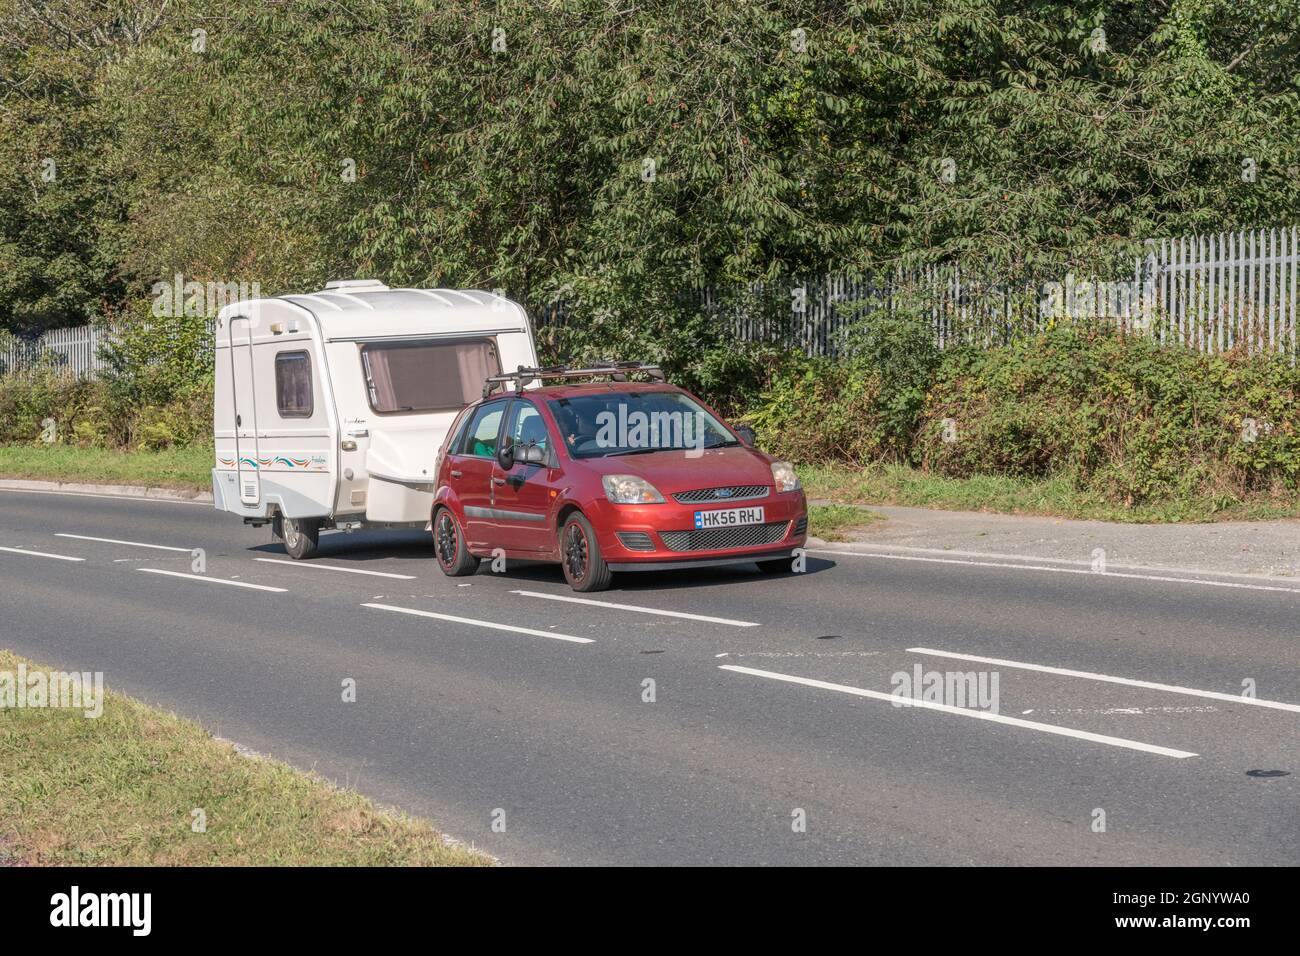 Ford car towing Freedom Twin caravan uphill on country road in Cornwall. For UK caravans, campervans, staycations in UK, alternative holidays. Stock Photo